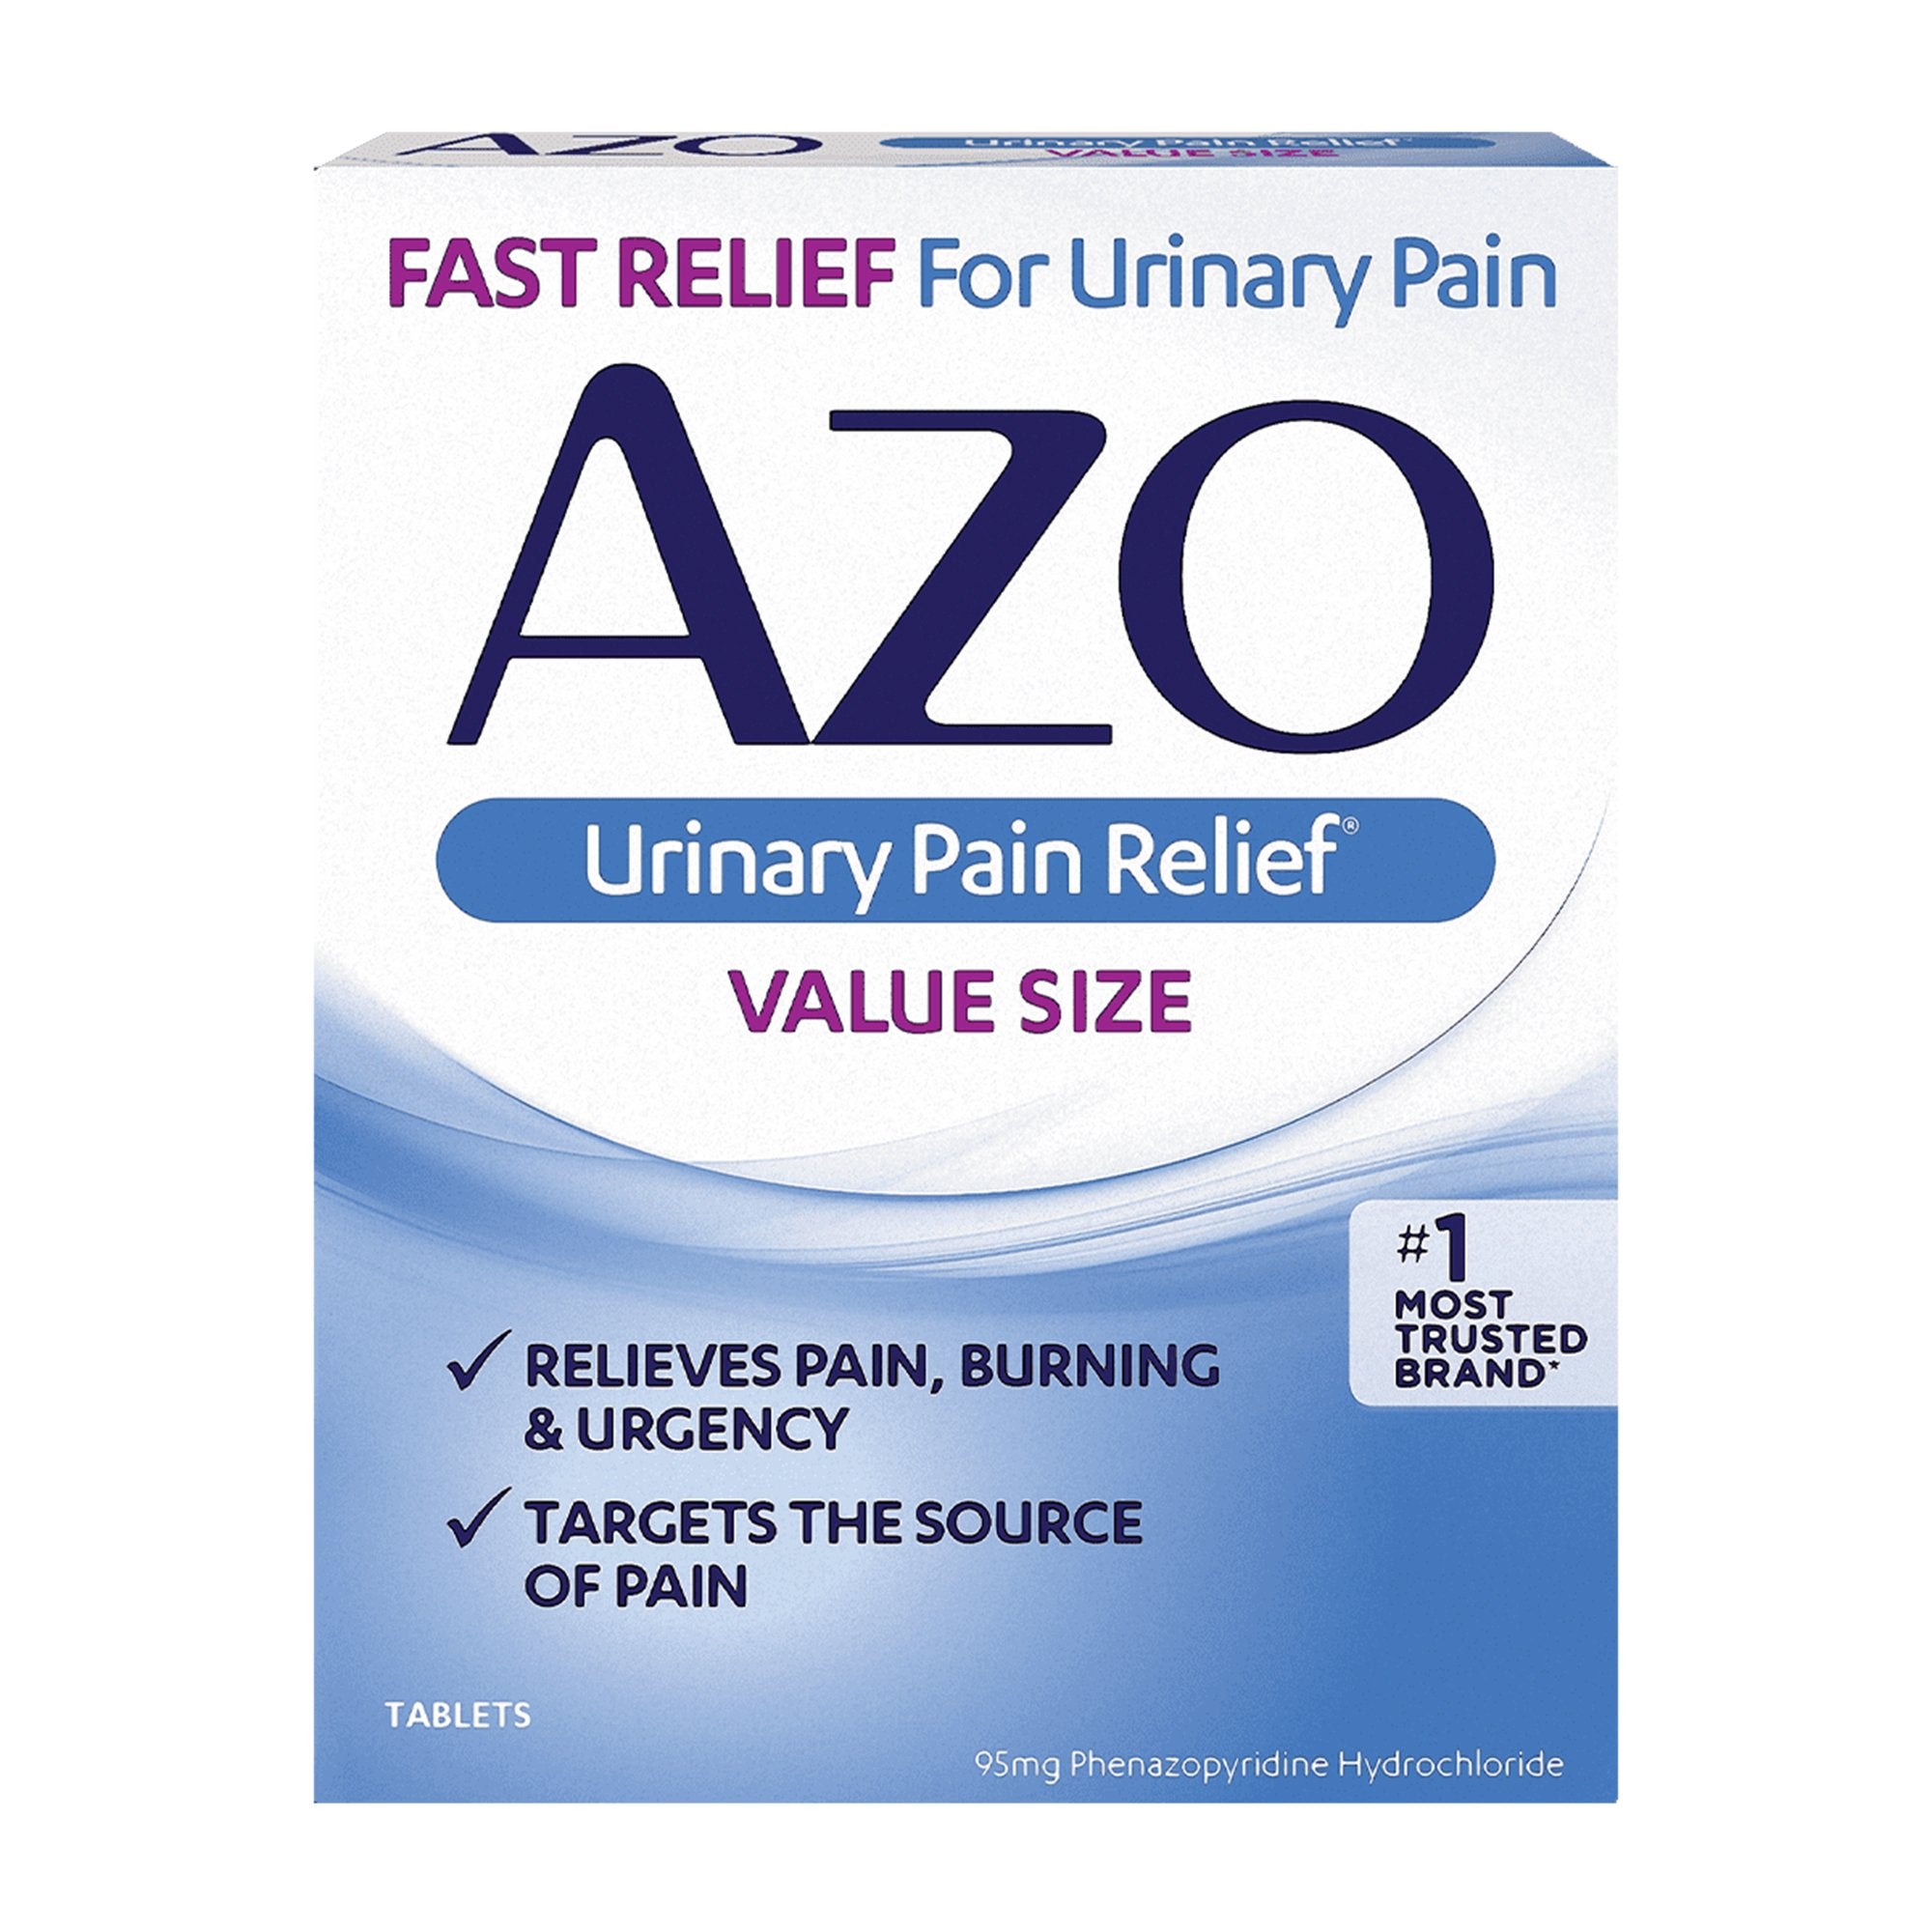 Urinary Pain Relief AZO 95 mg Strength Phenazopyridine HCL Tablet 30 per Bottle